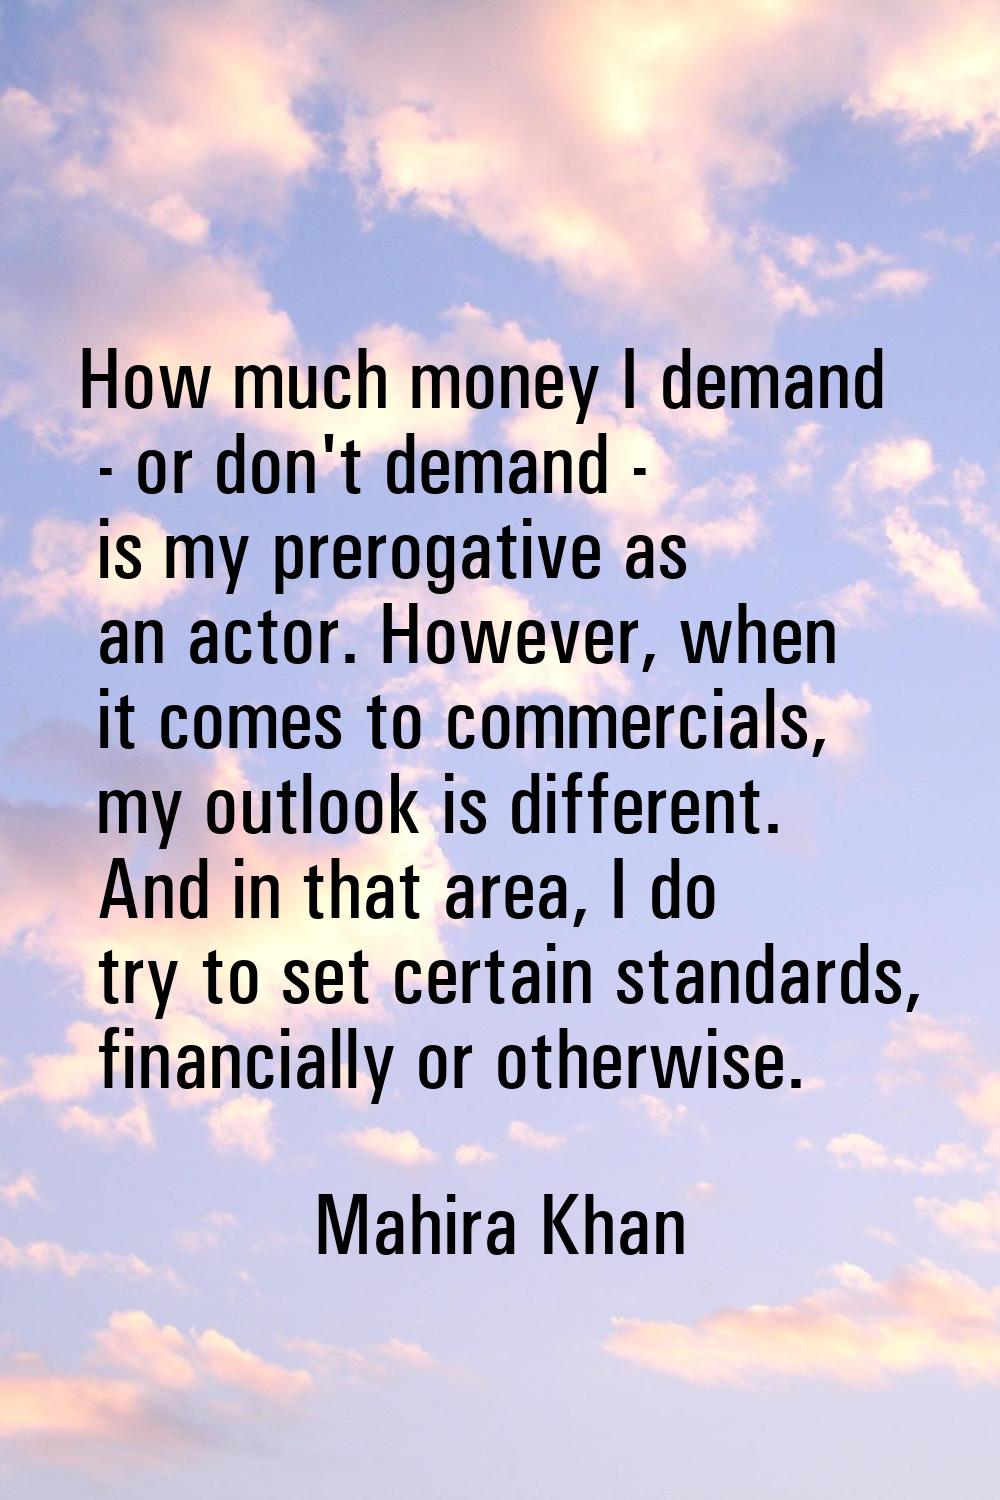 How much money I demand - or don't demand - is my prerogative as an actor. However, when it comes t